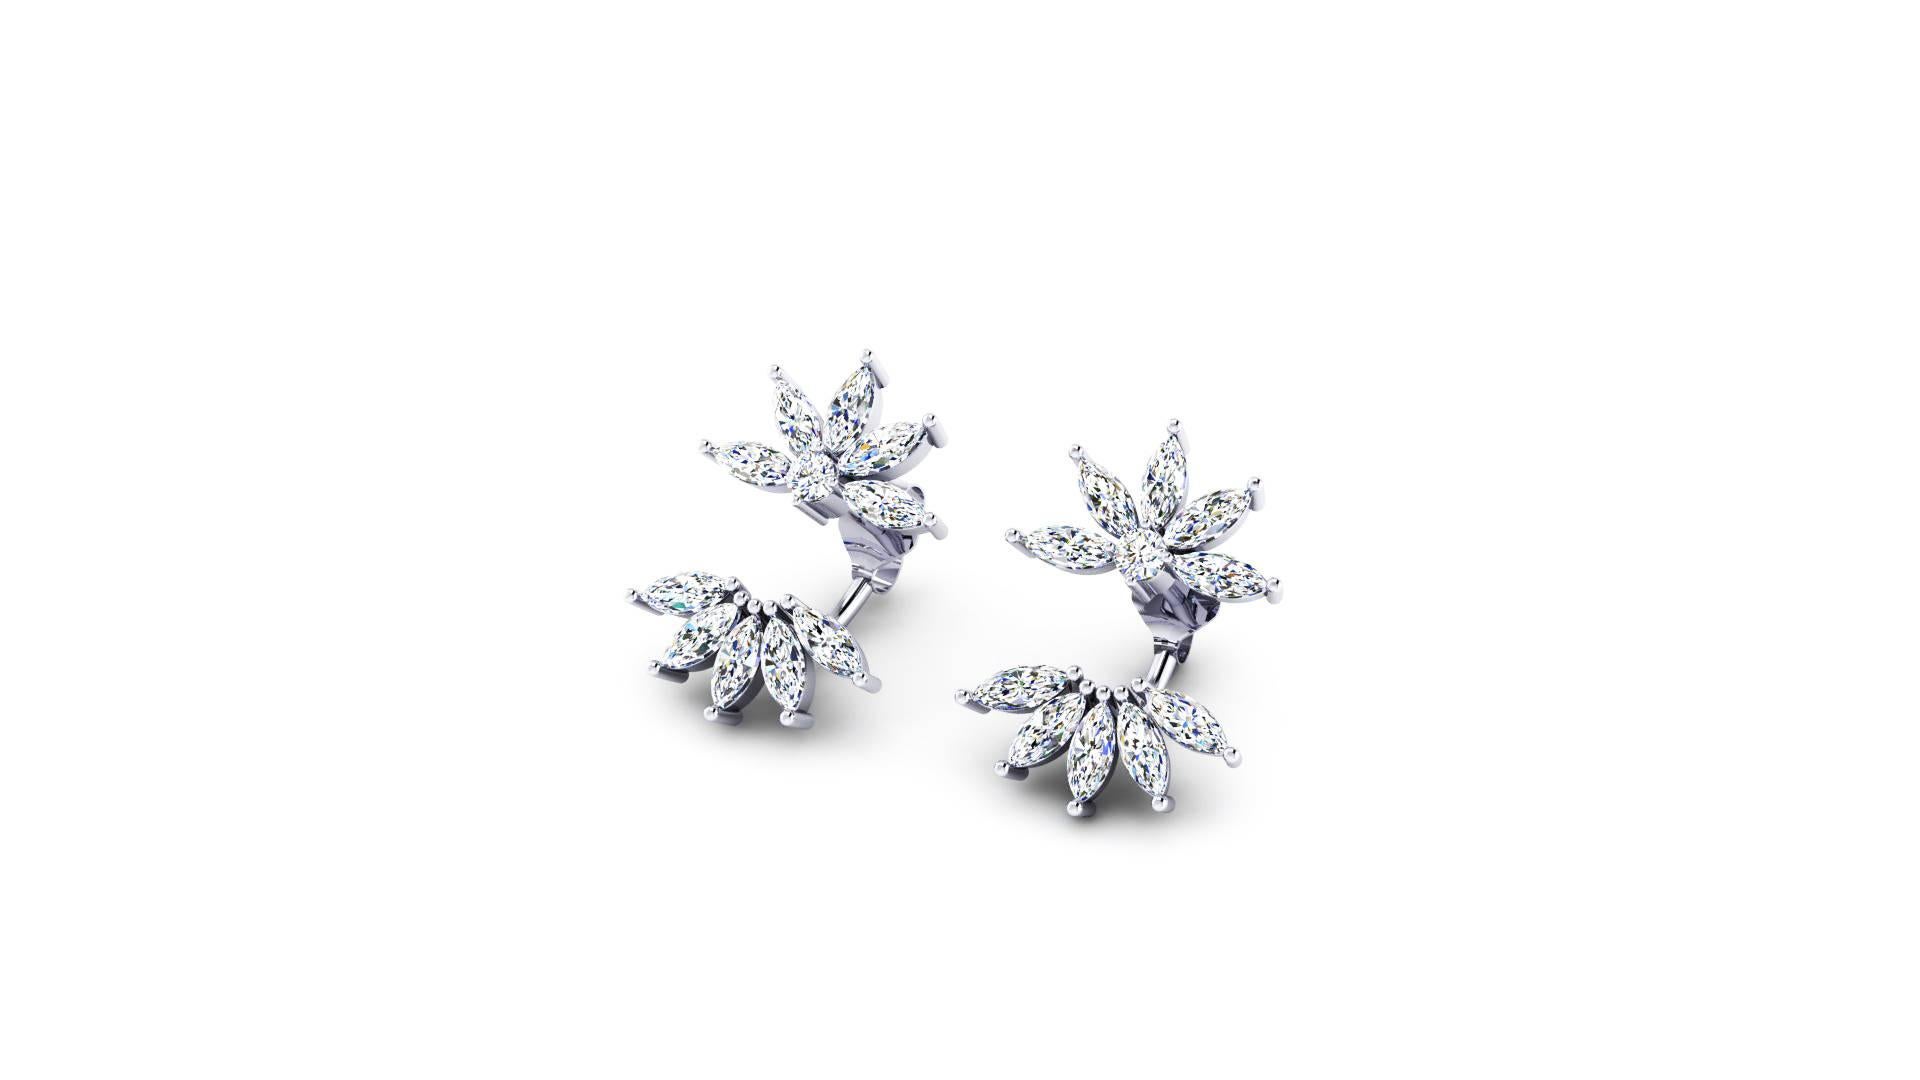 FERRUCCI 2.05 carats Marquise shape Diamonds Star earrings handmade in 18k white gold in New York by Italian master jeweler, modern and chic design, for a young spirit woman with classy taste, ideal to wear from office to evening out, 
perfect gift